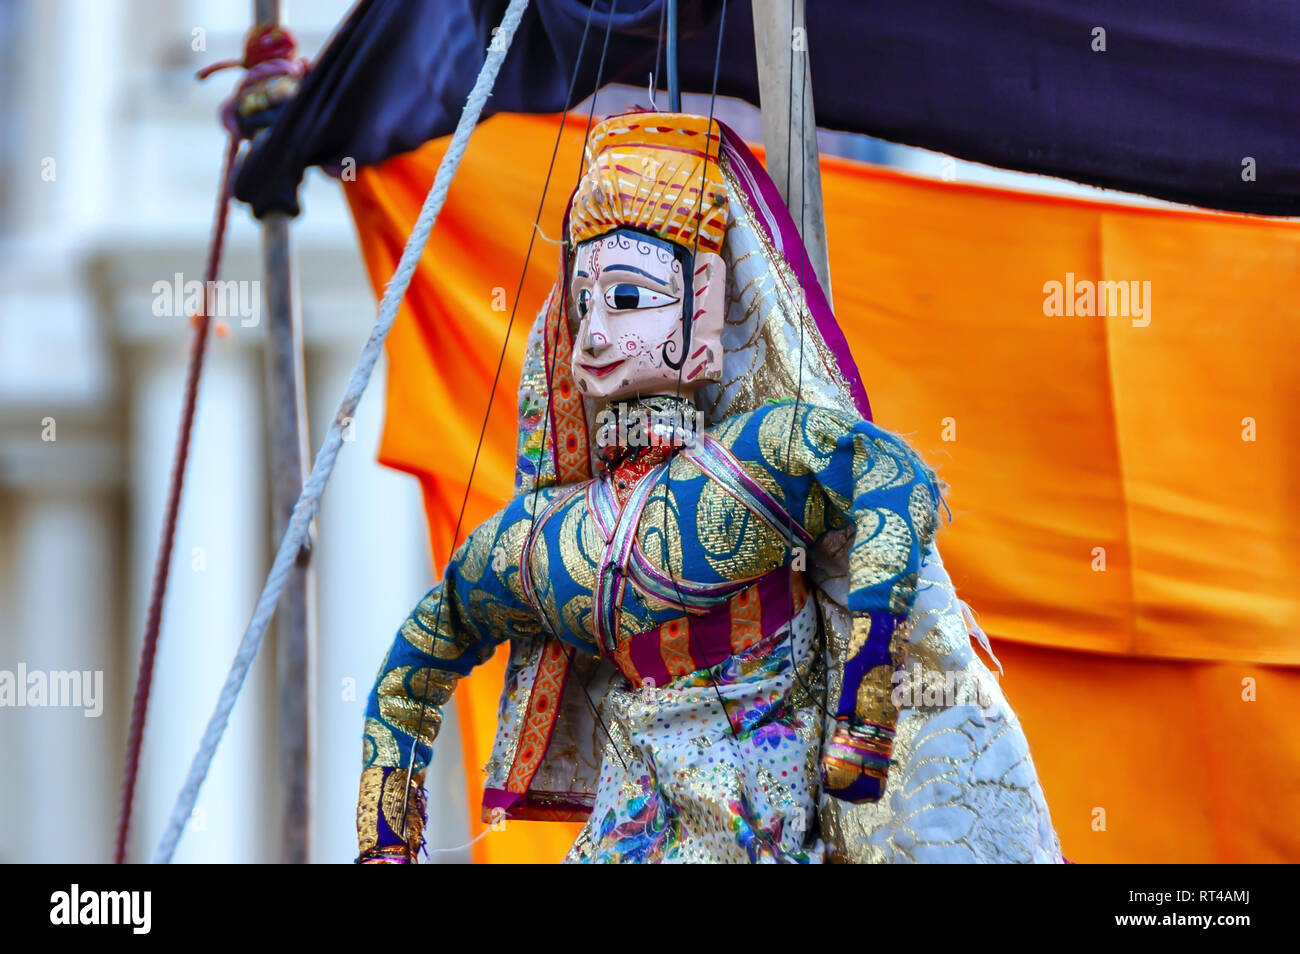 A string puppet, called kathputli, from the Indian state of Rajasthan. Stock Photo